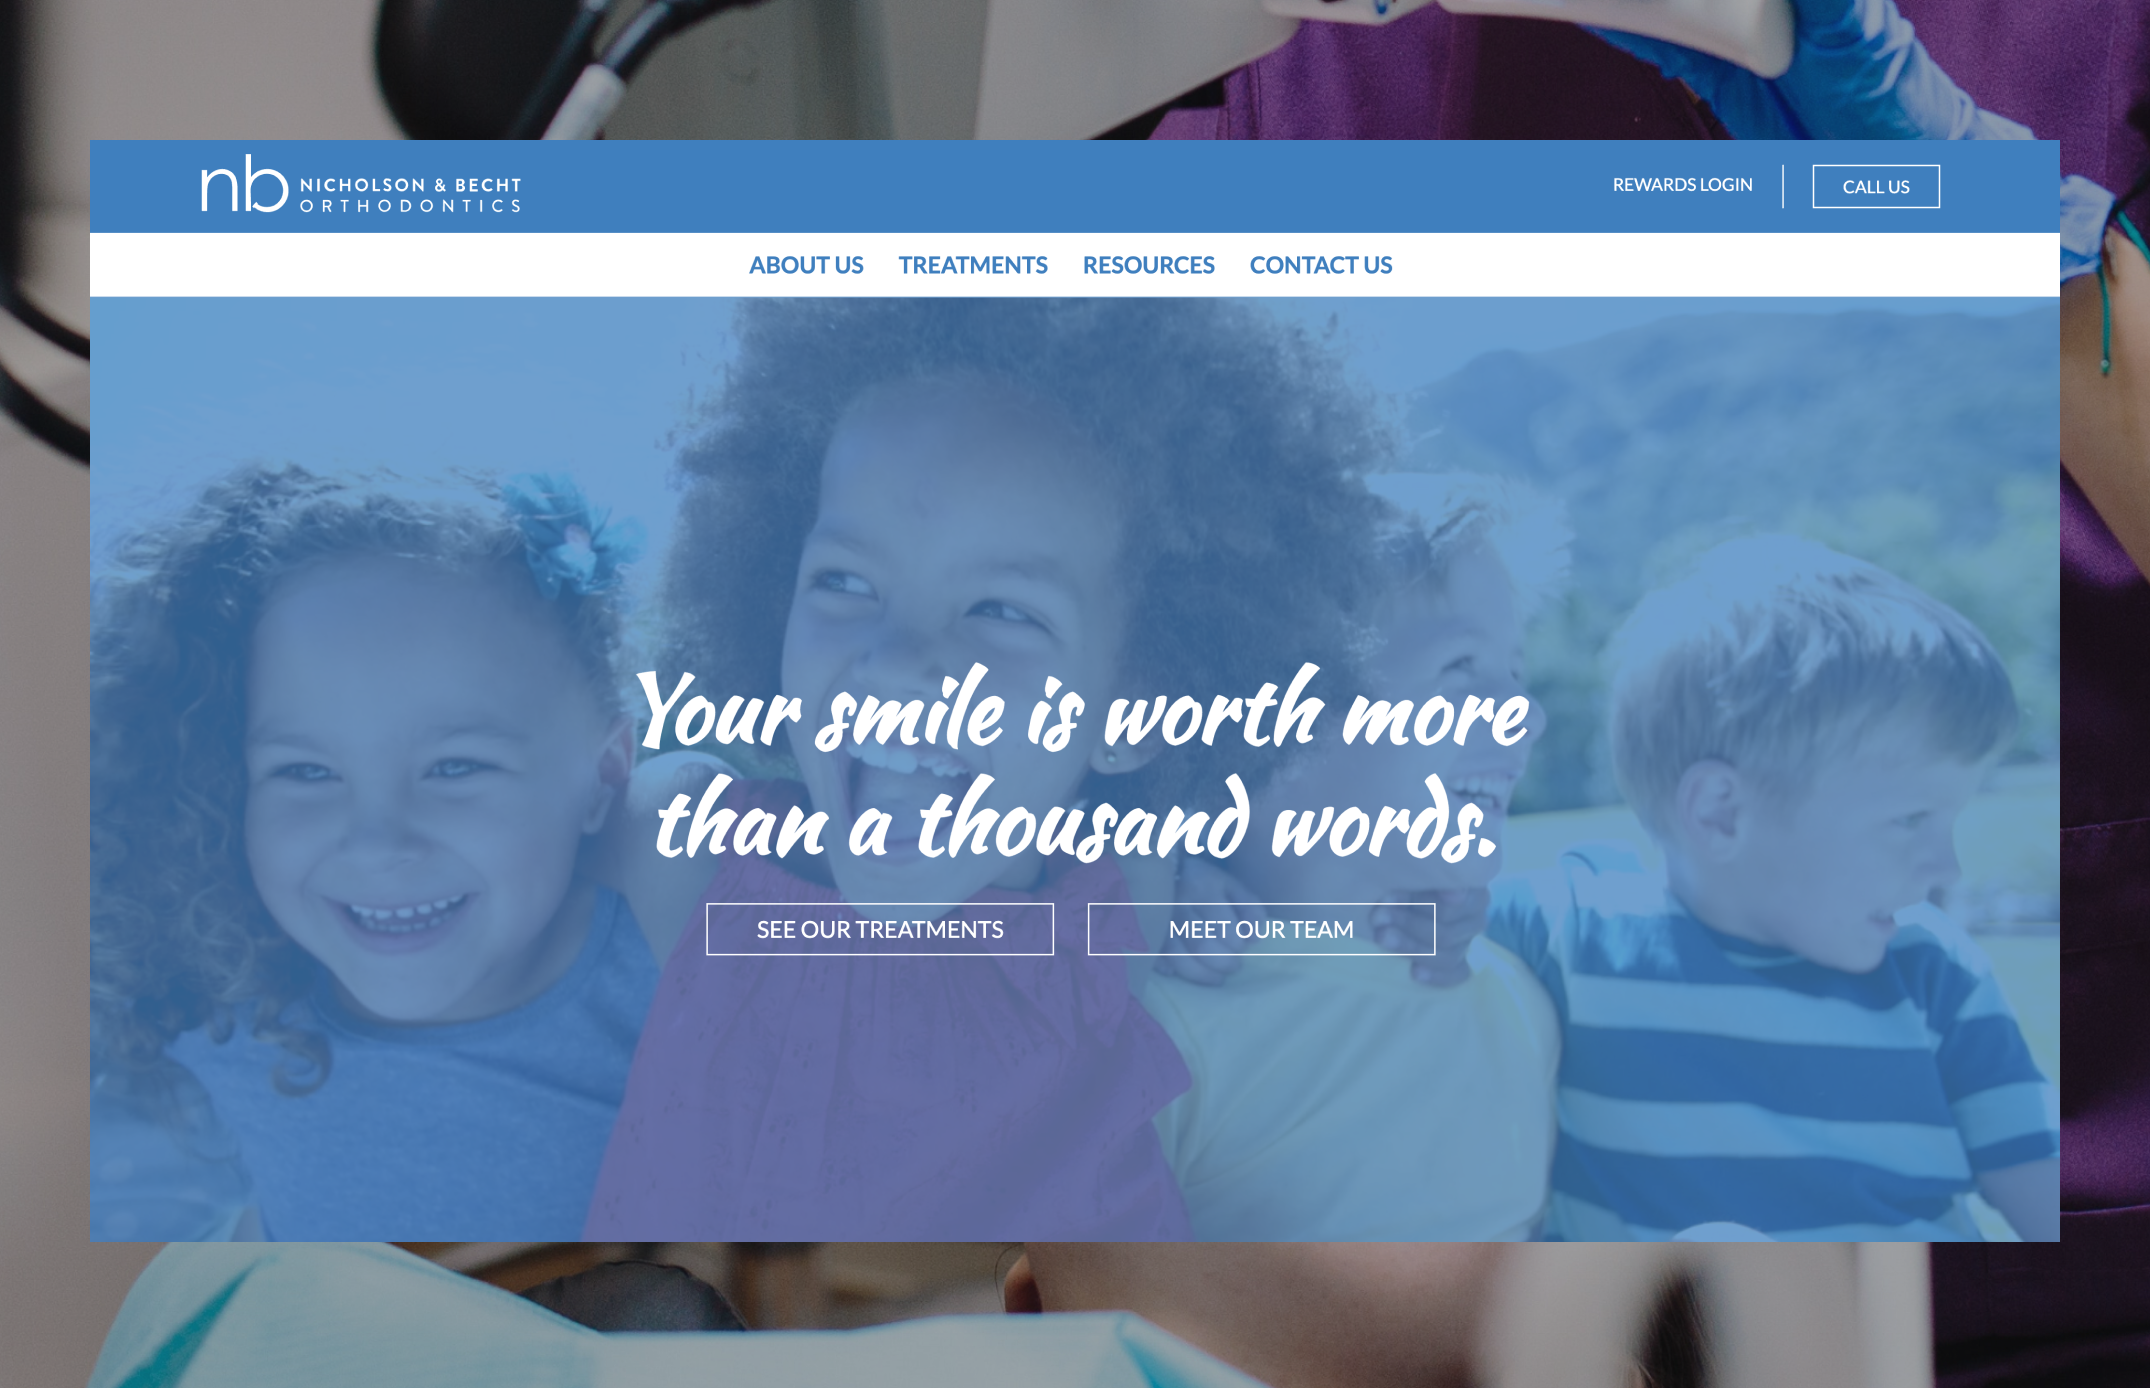 Screengrab of the homepage of the website with image of kids smiling arm in arm